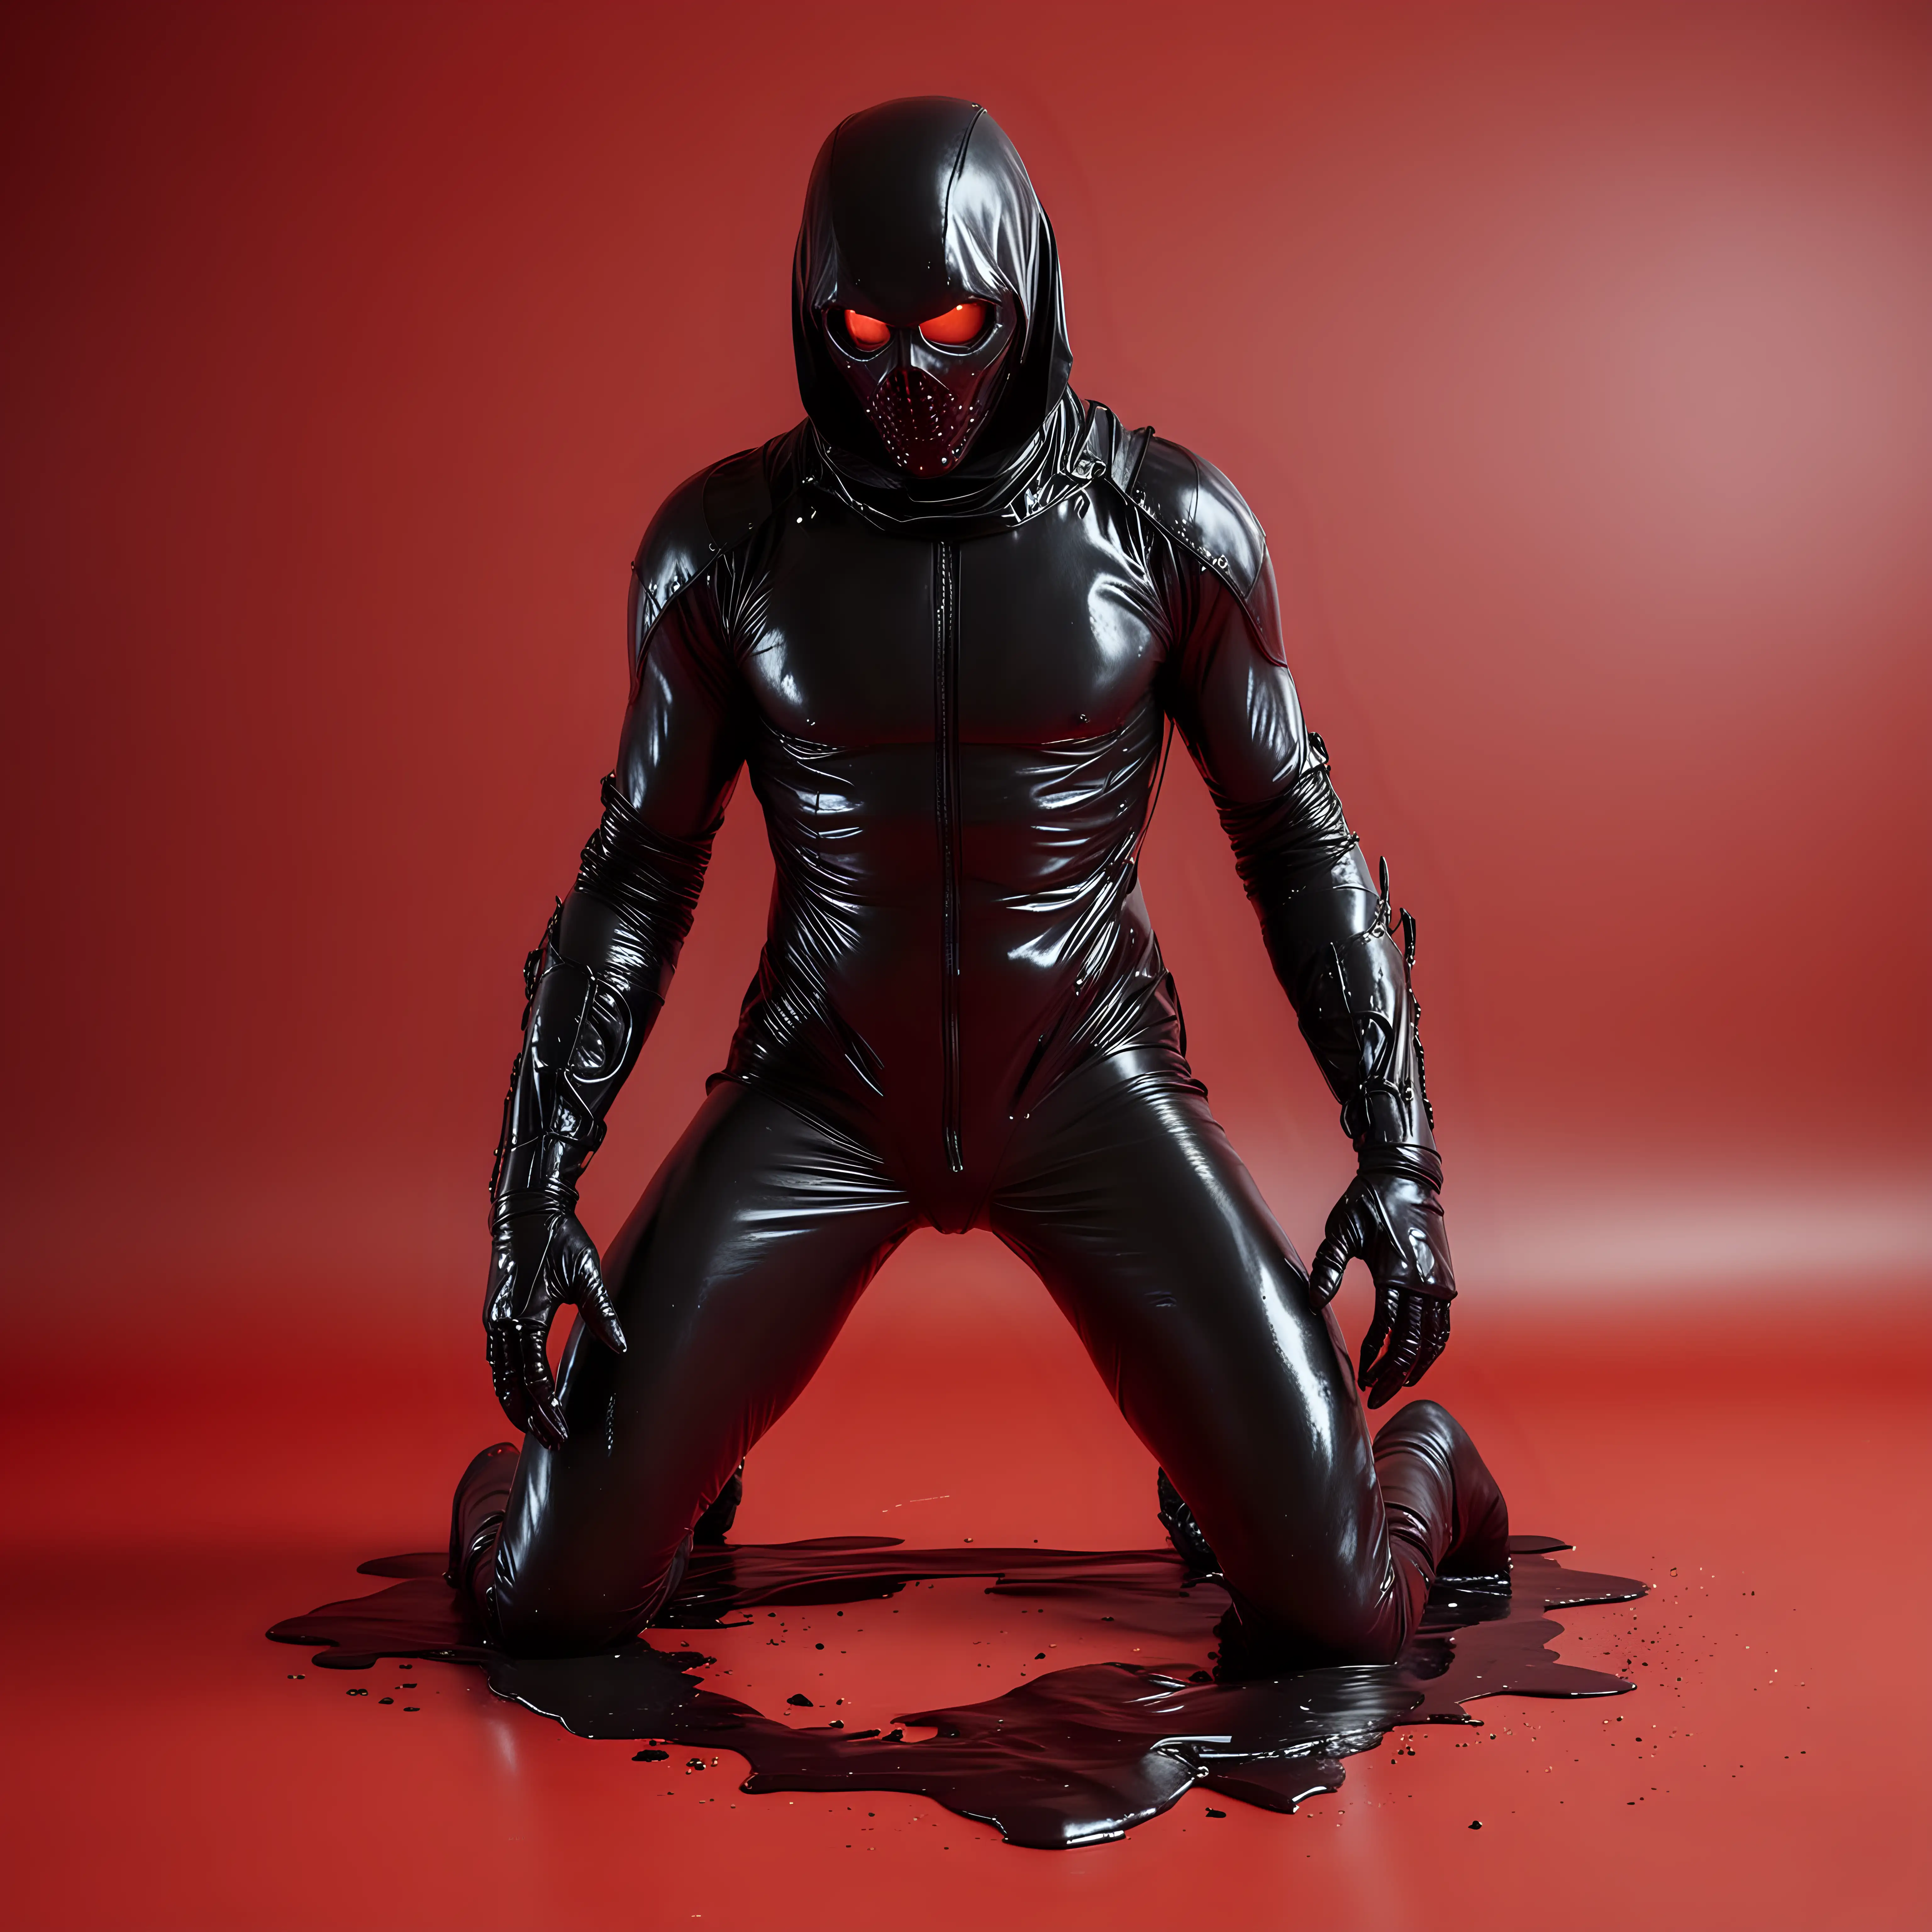 Mysterious-Figure-in-Black-Latex-Suit-on-Red-Background